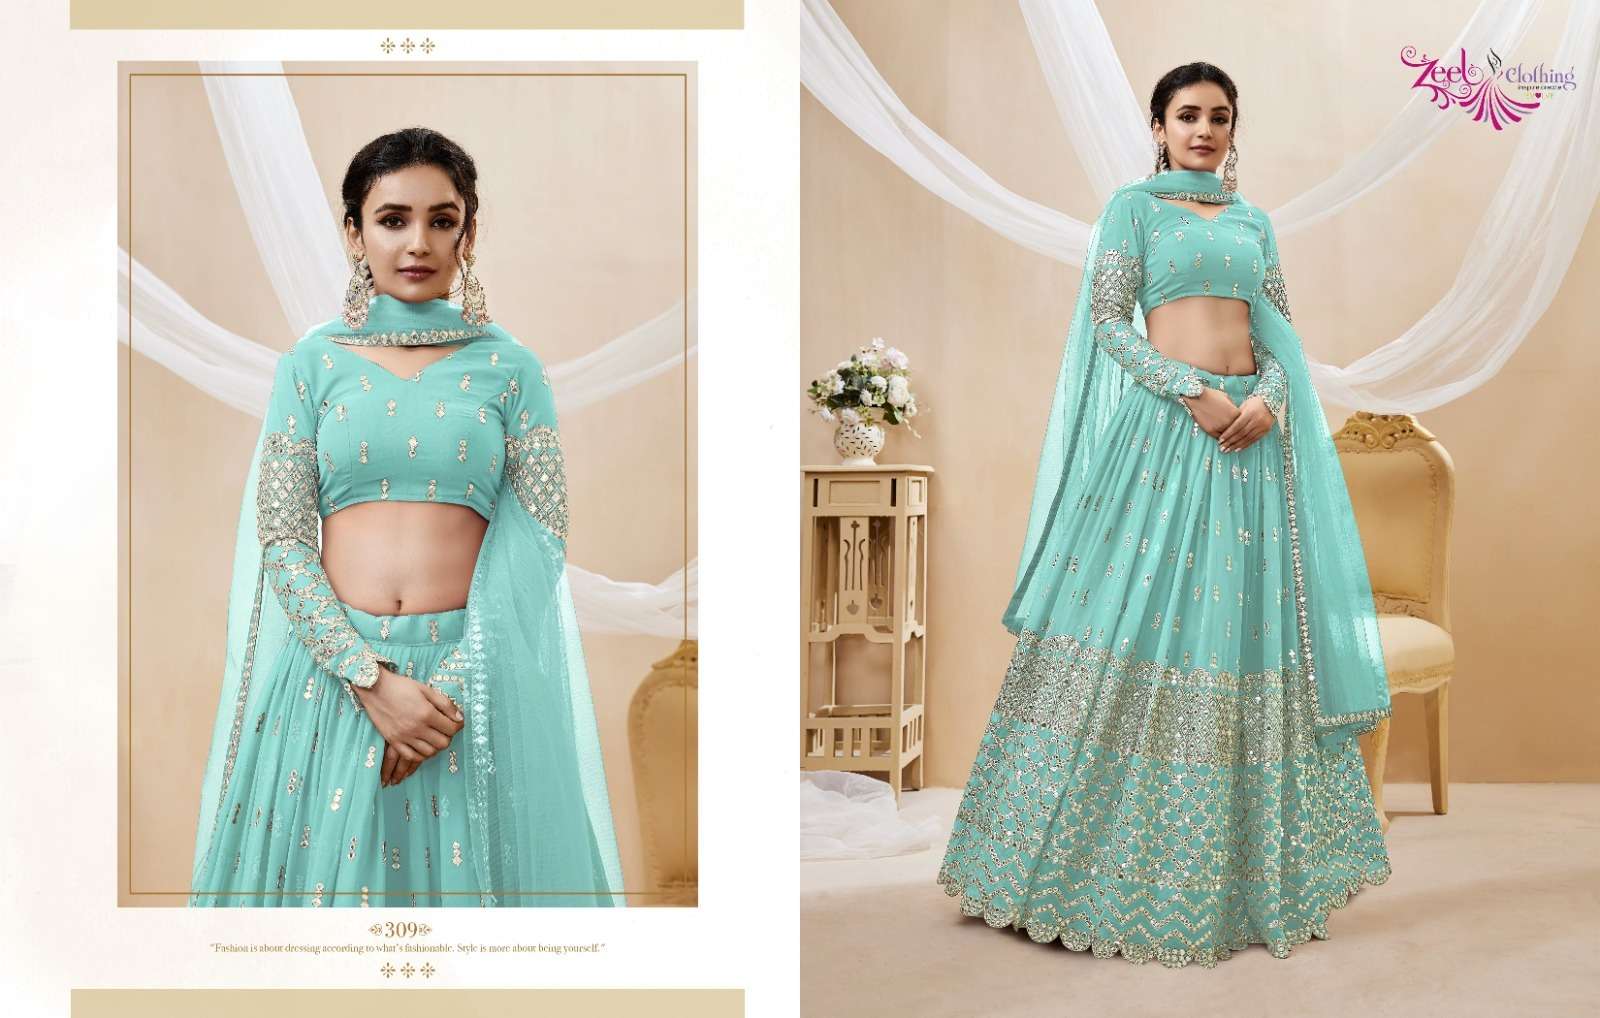 Expression Vol-1 By Zeel Clothing 301 To 311 Series Bridal Wear Collection Beautiful Stylish Colorful Fancy Party Wear & Occasional Wear Georgette Lehengas At Wholesale Price